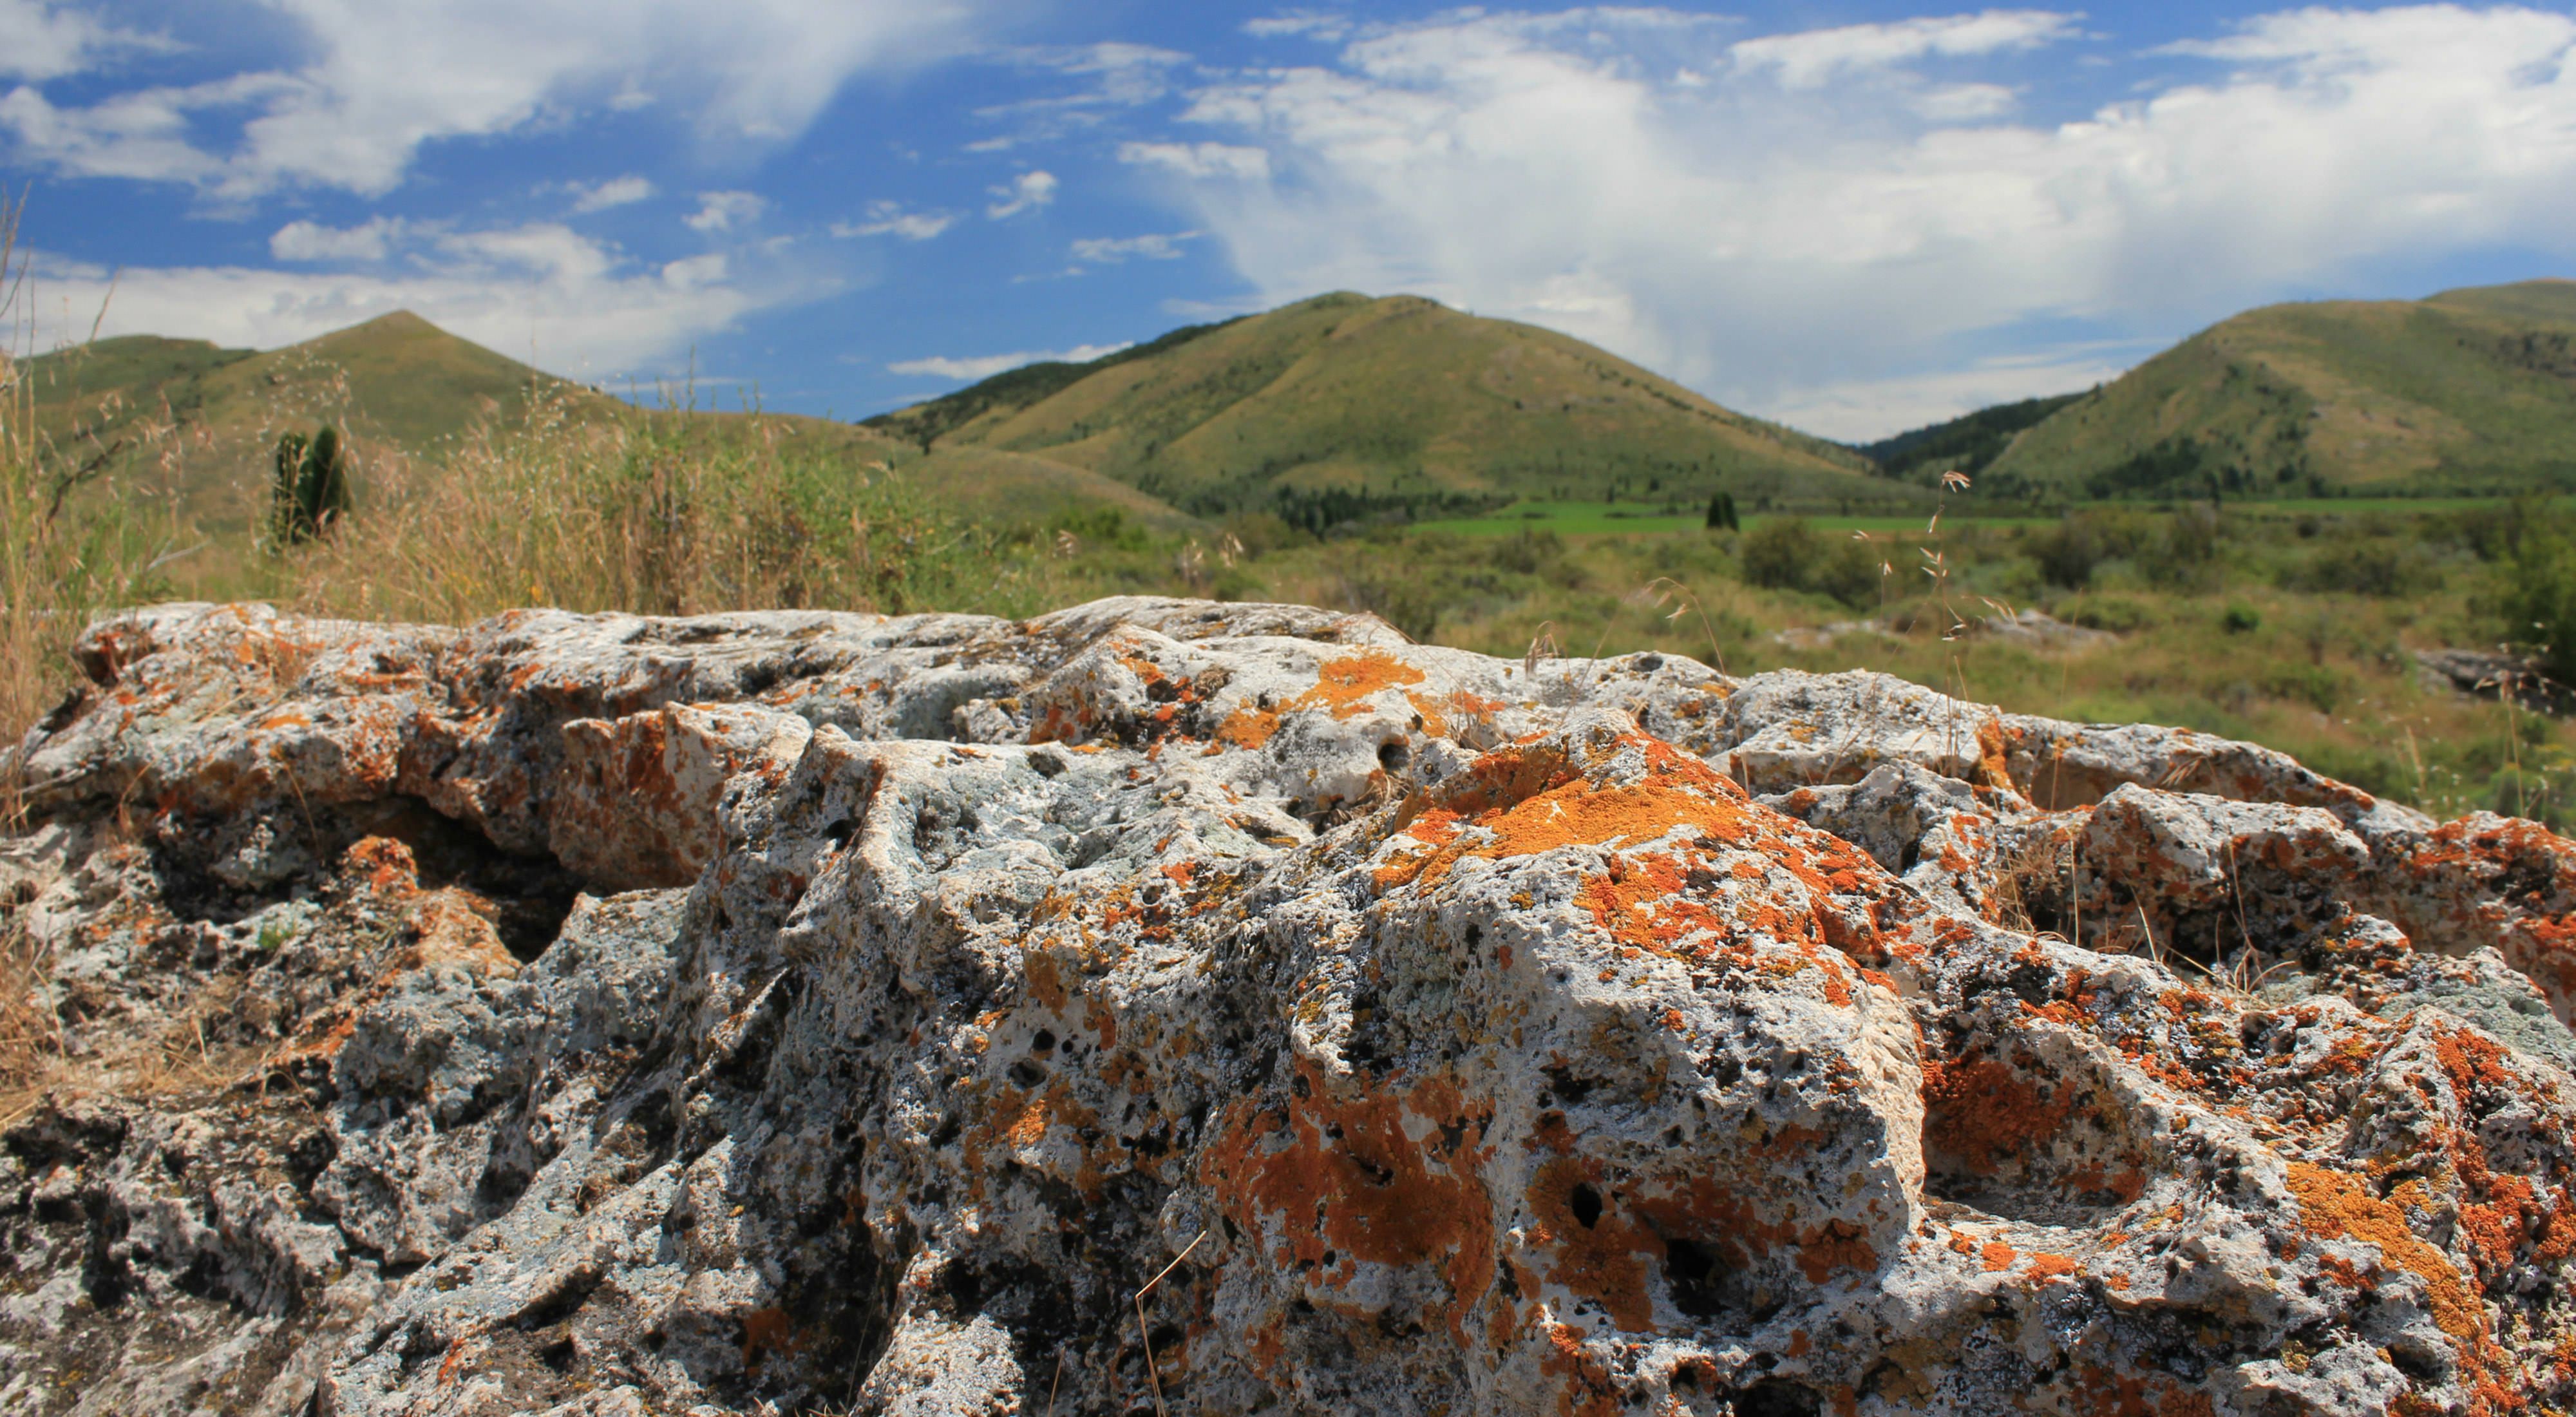 A rocky outcrop with orange lichen growing on it in the foreground with grassy hills in the background.